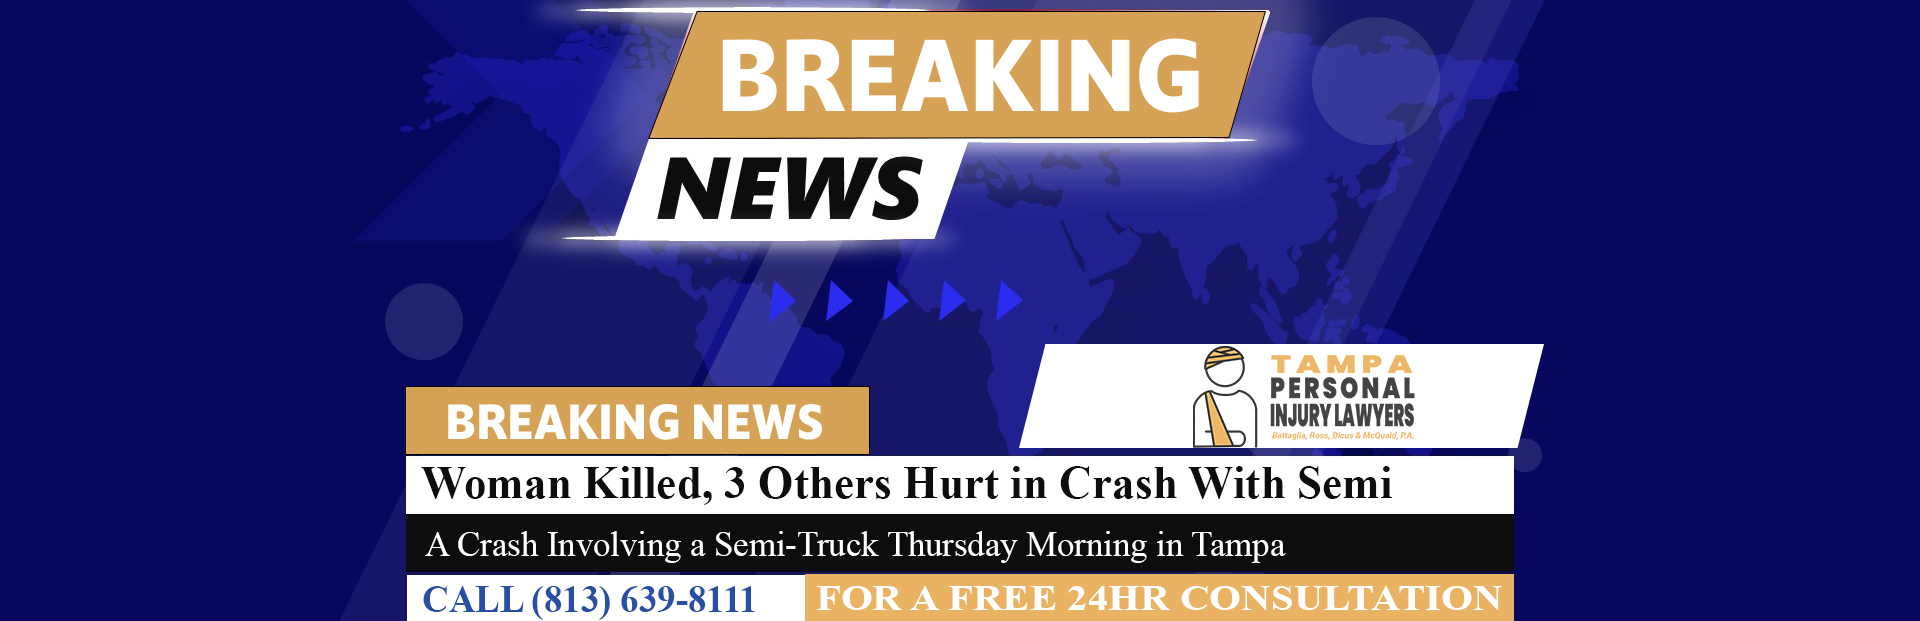 [09-02-23] Woman Killed, 3 Others Hurt in Tampa Crash With Semi